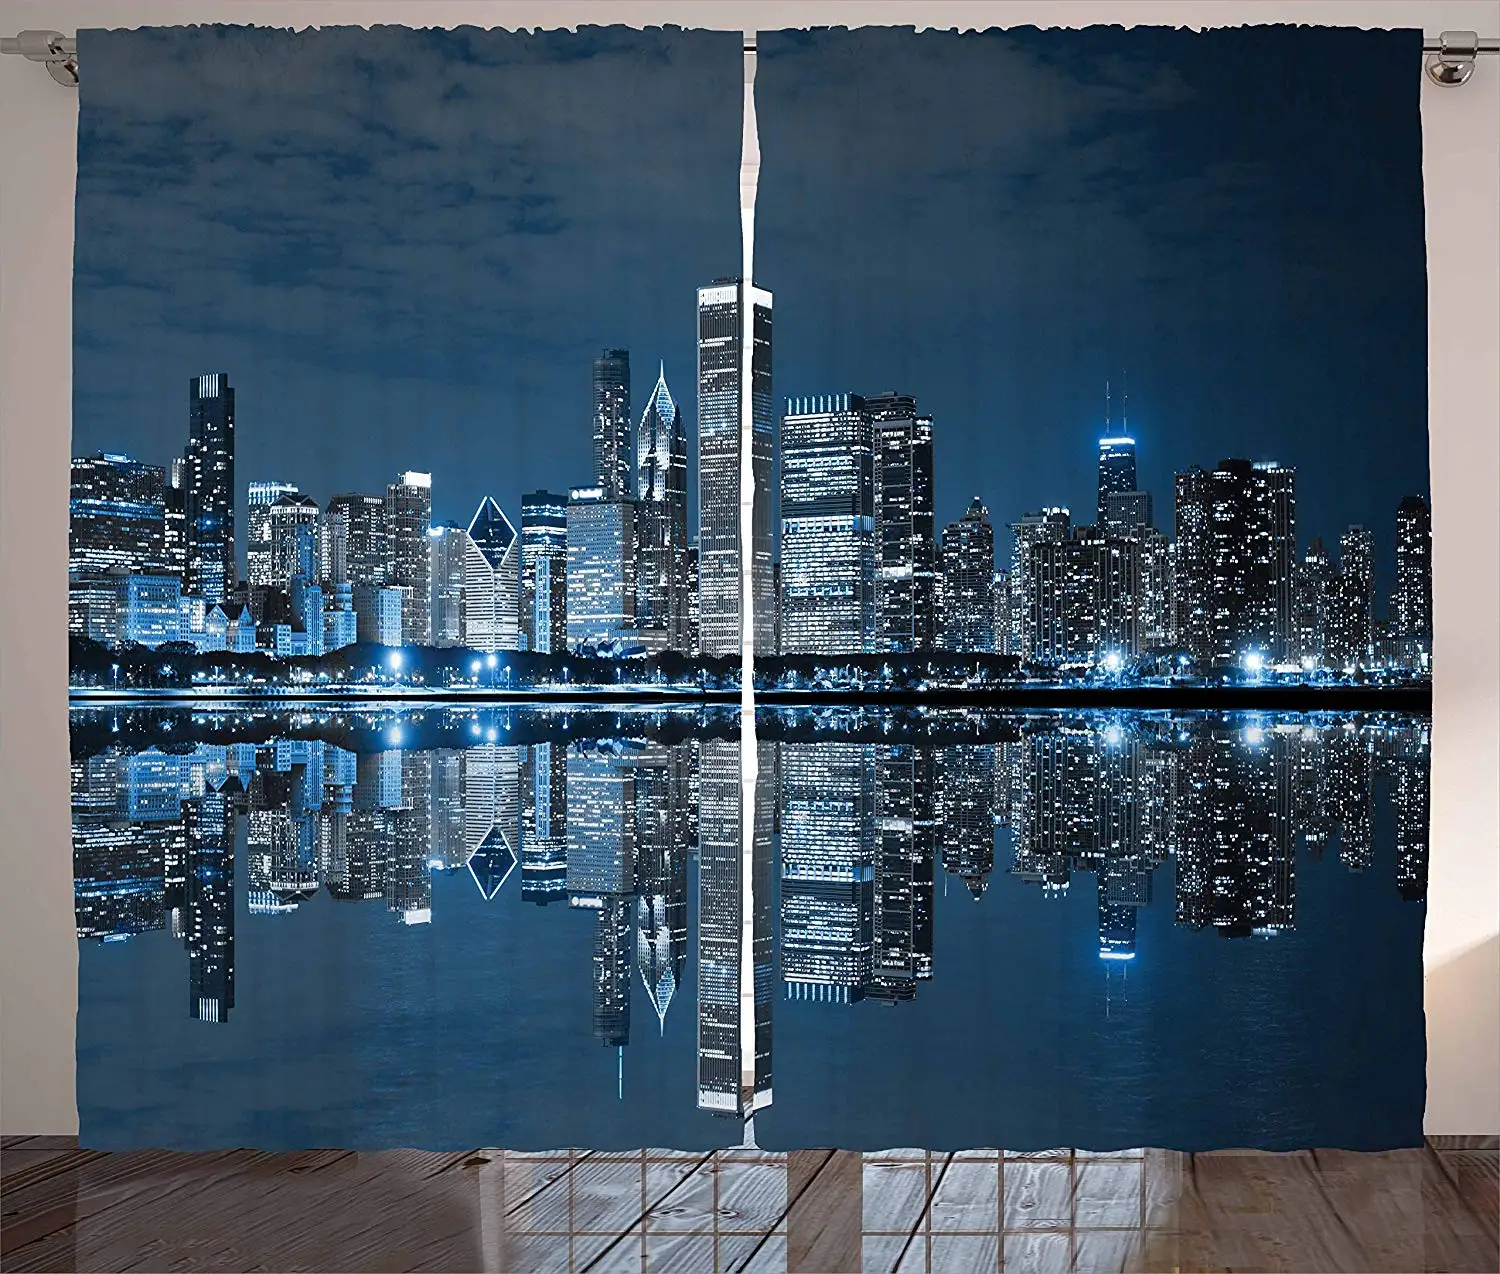 

Chicago Skyline Curtains Sleeping City Dramatic Urban Resting Popular American Lake Picture Living Room Bedroom Window Drapes